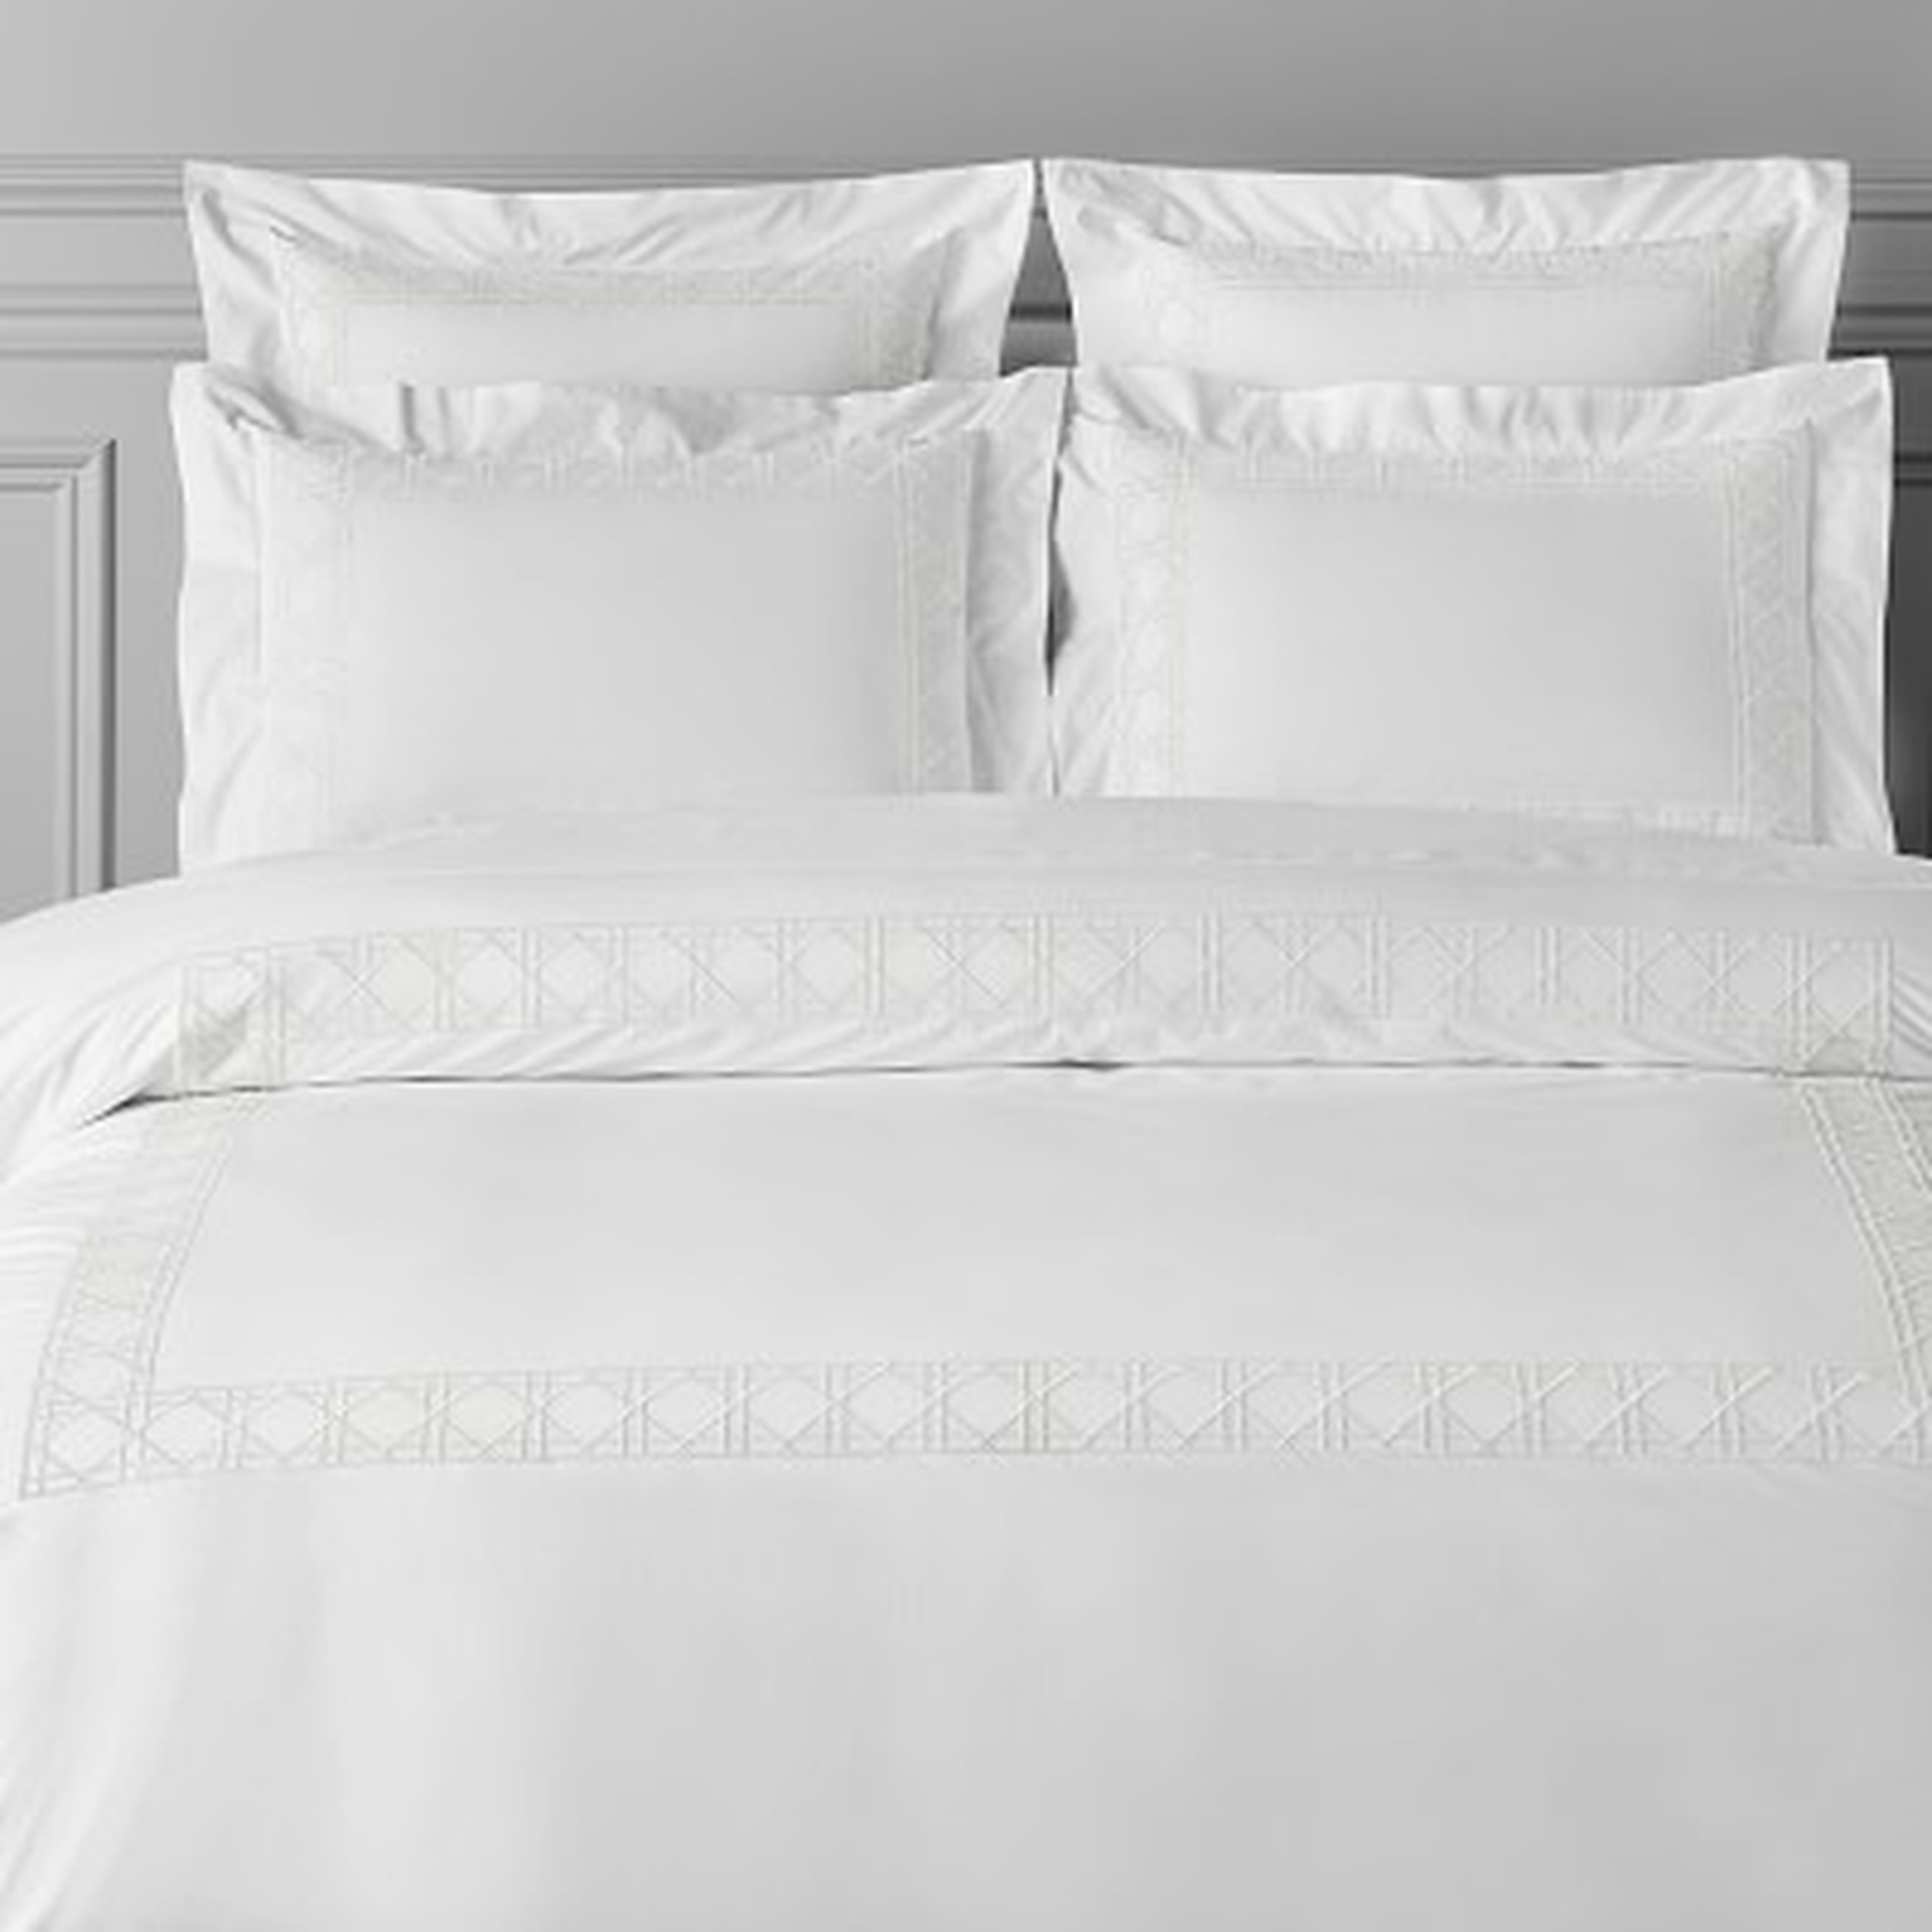 Cane Embroidery Duvet Cover, Full/Queen, White - Williams Sonoma